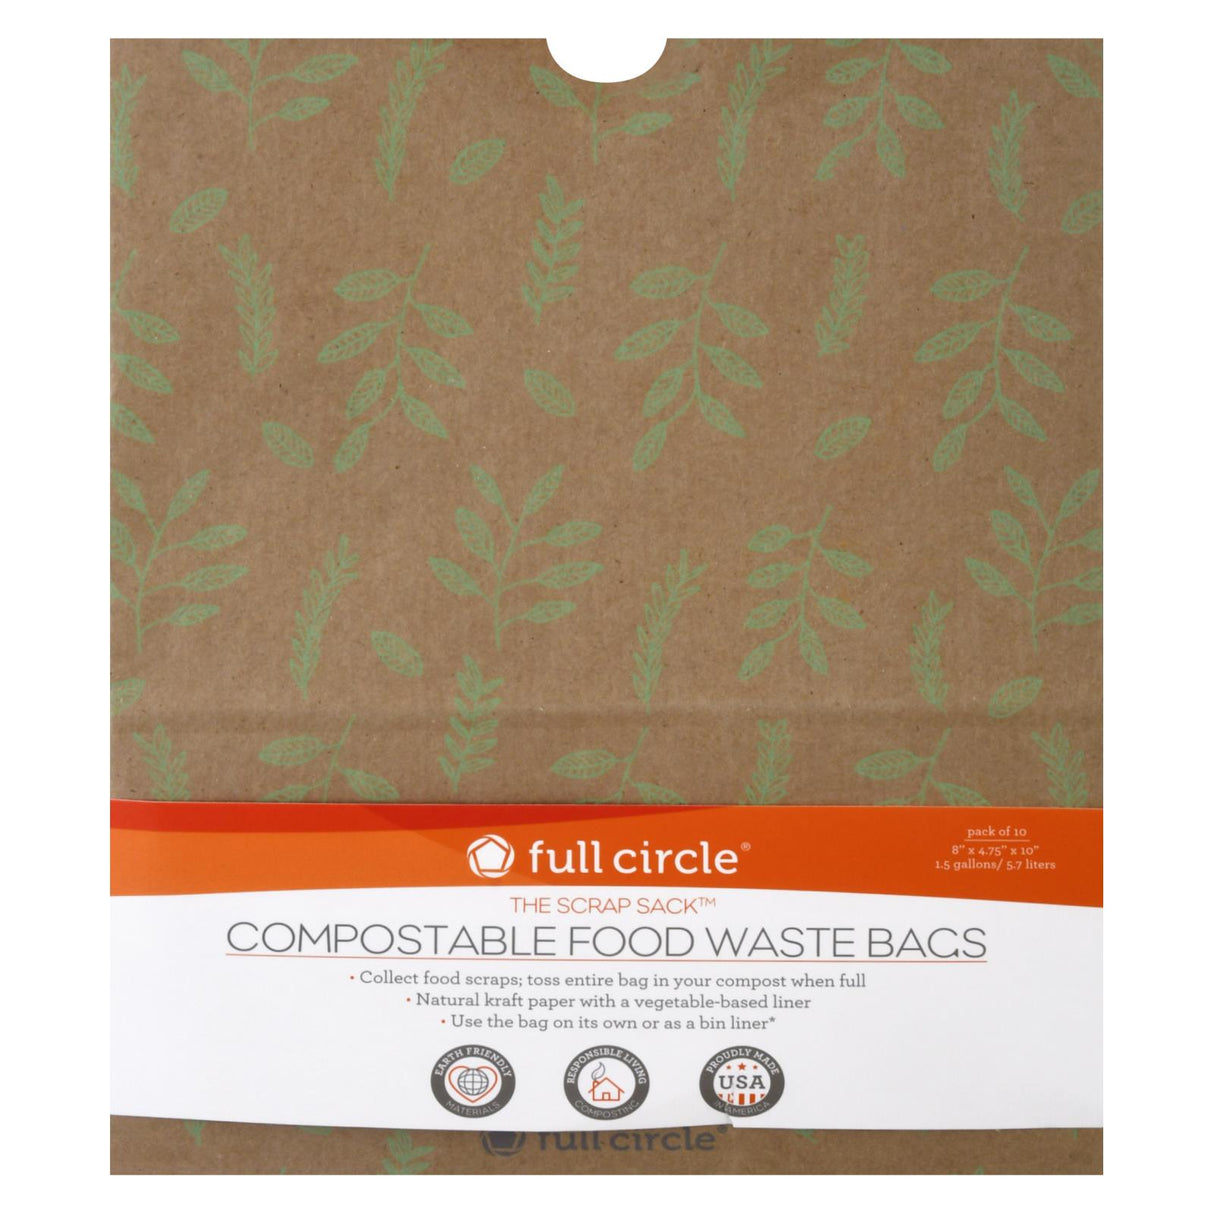 Full Circle Home Compostable Food Waste Bags - 10 Count (Case of 6) - Cozy Farm 